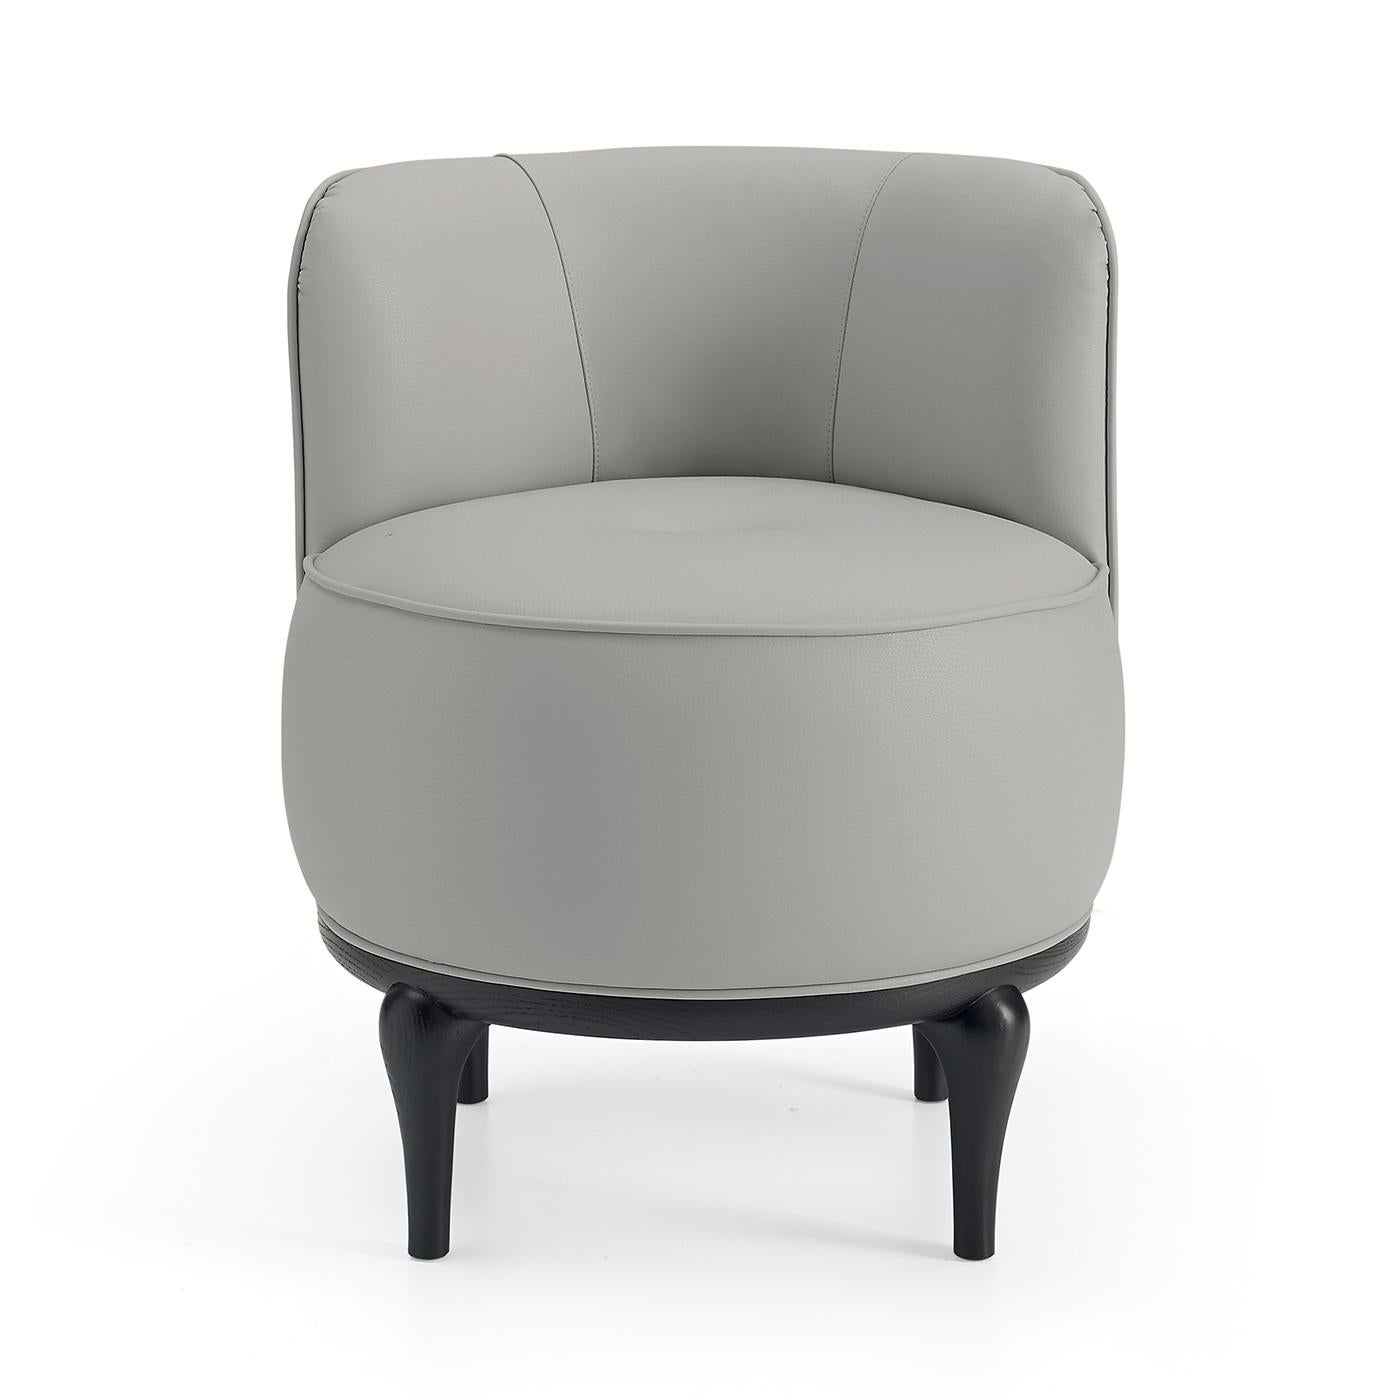 This splendid and innovative pouf exudes extreme comfort and relaxation thanks to its soft seat and to the addition of a welcoming backrest. Resting on a solid ash structure with short but sturdy feet, the seat and backrest are upholstered of fine